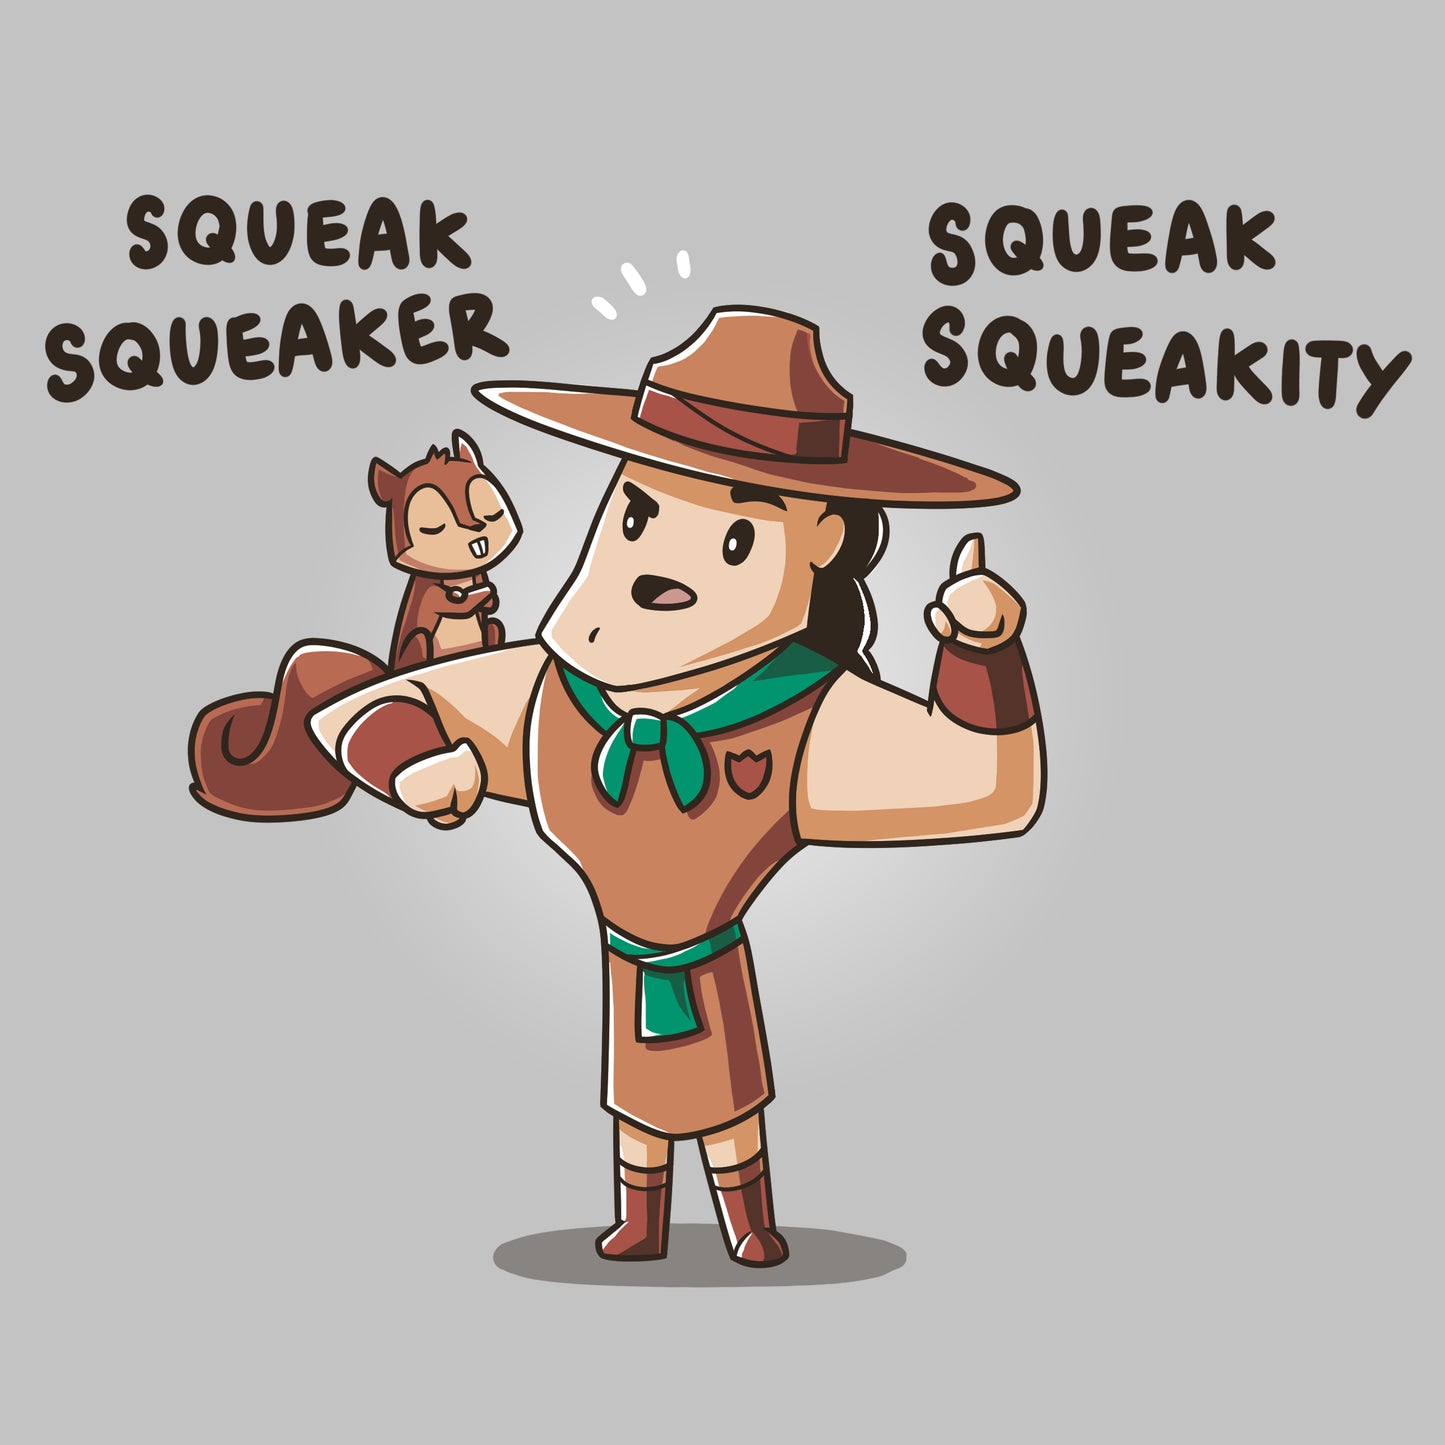 An officially licensed Disney cartoon character wearing a Squeak Squeakity cotton T-shirt squawks with the words squawk squawkity.